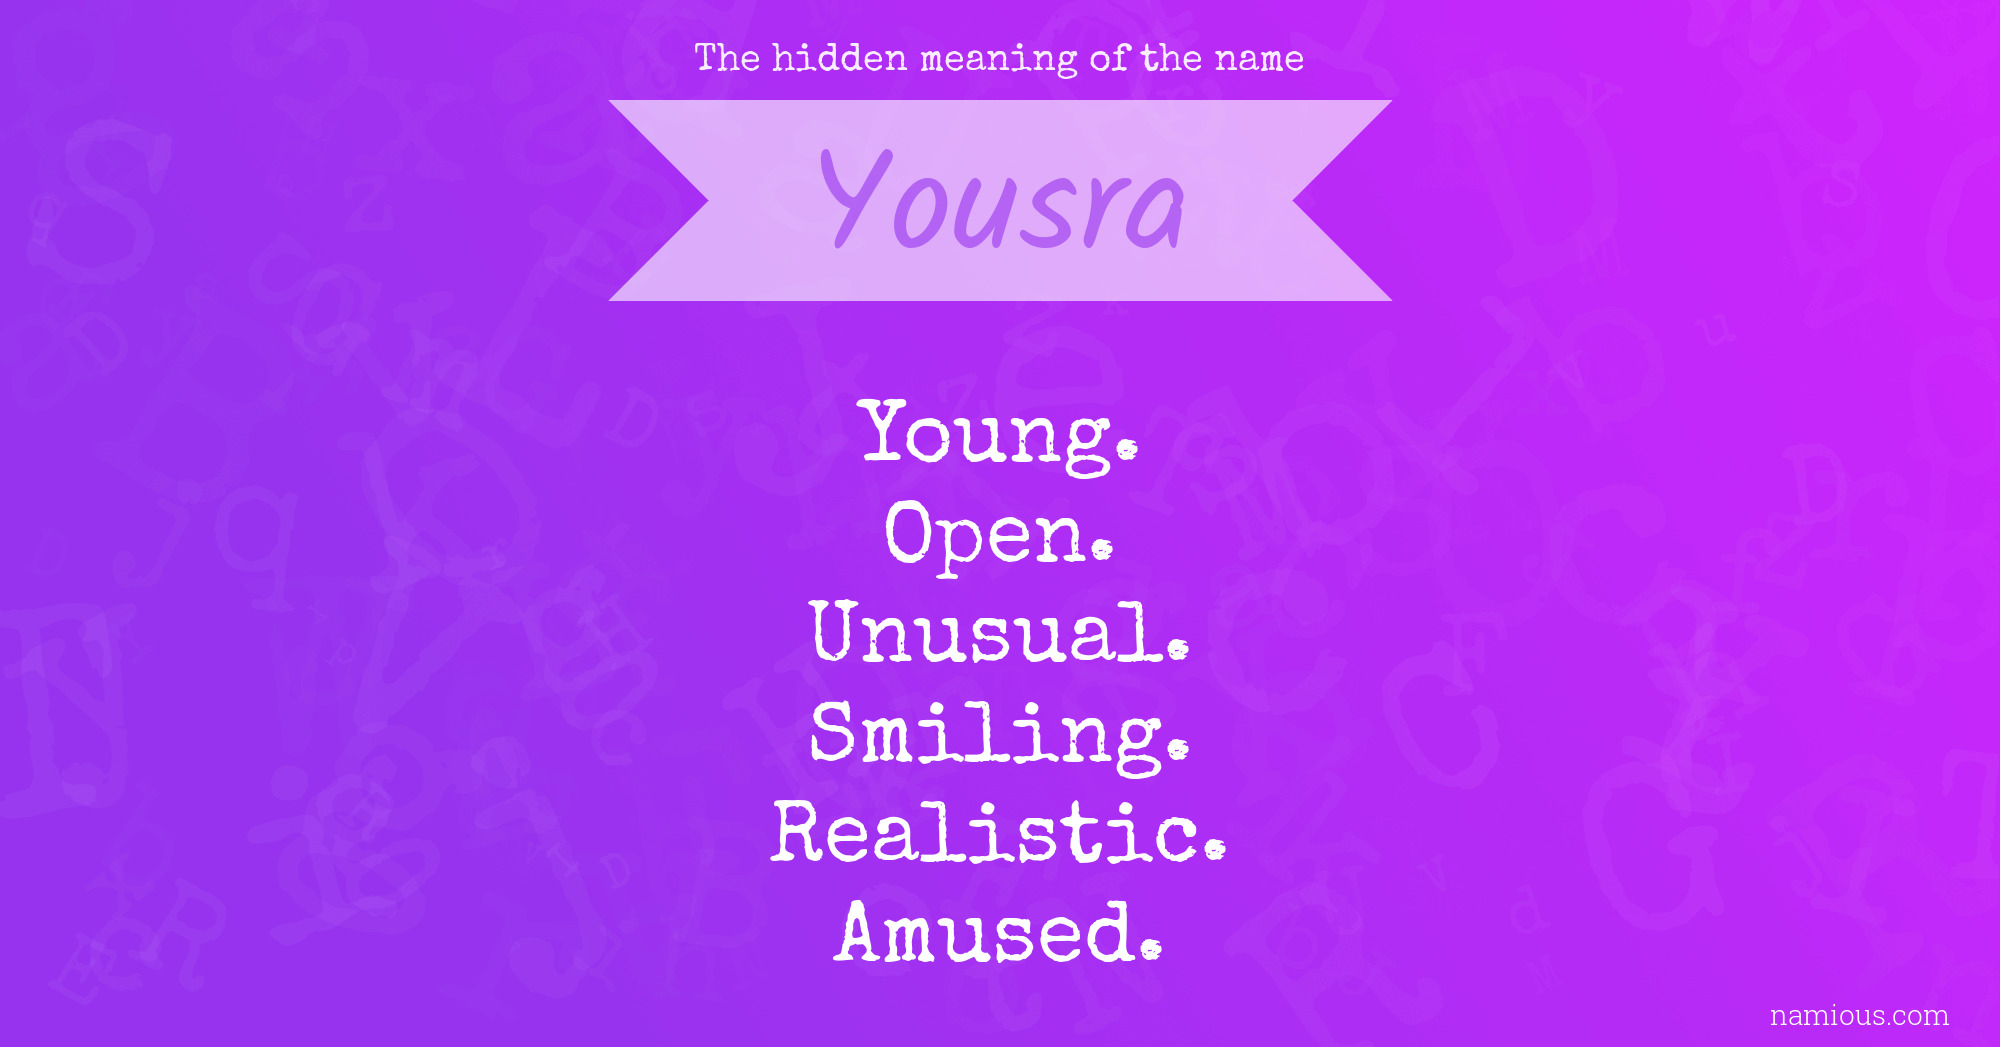 The hidden meaning of the name Yousra